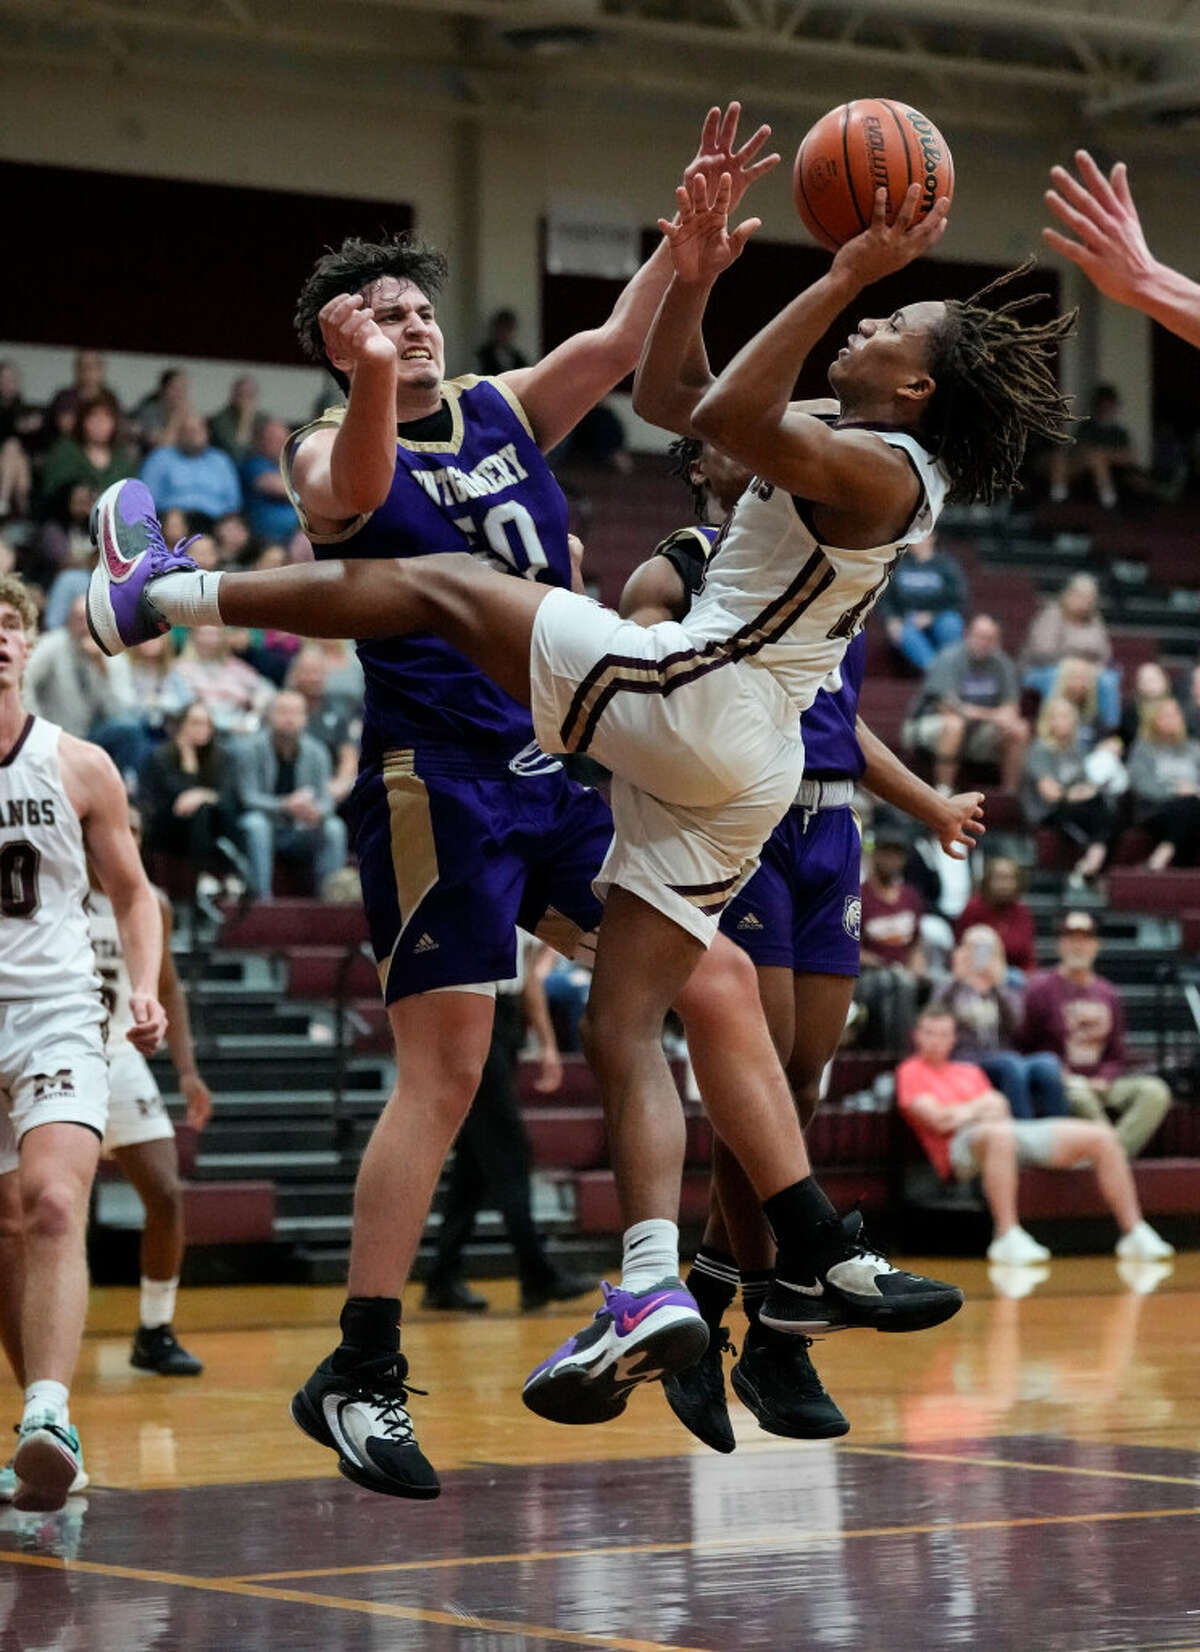 Magnolia West shooting guard Xavier Portalis (10) goes up to the basket against Montgomery center RJ Kime (50) during the second half of a District 21-5A boys basketball game at Magnolia West High School on Tuesday, Jan. 3, 2023 in Magnolia.